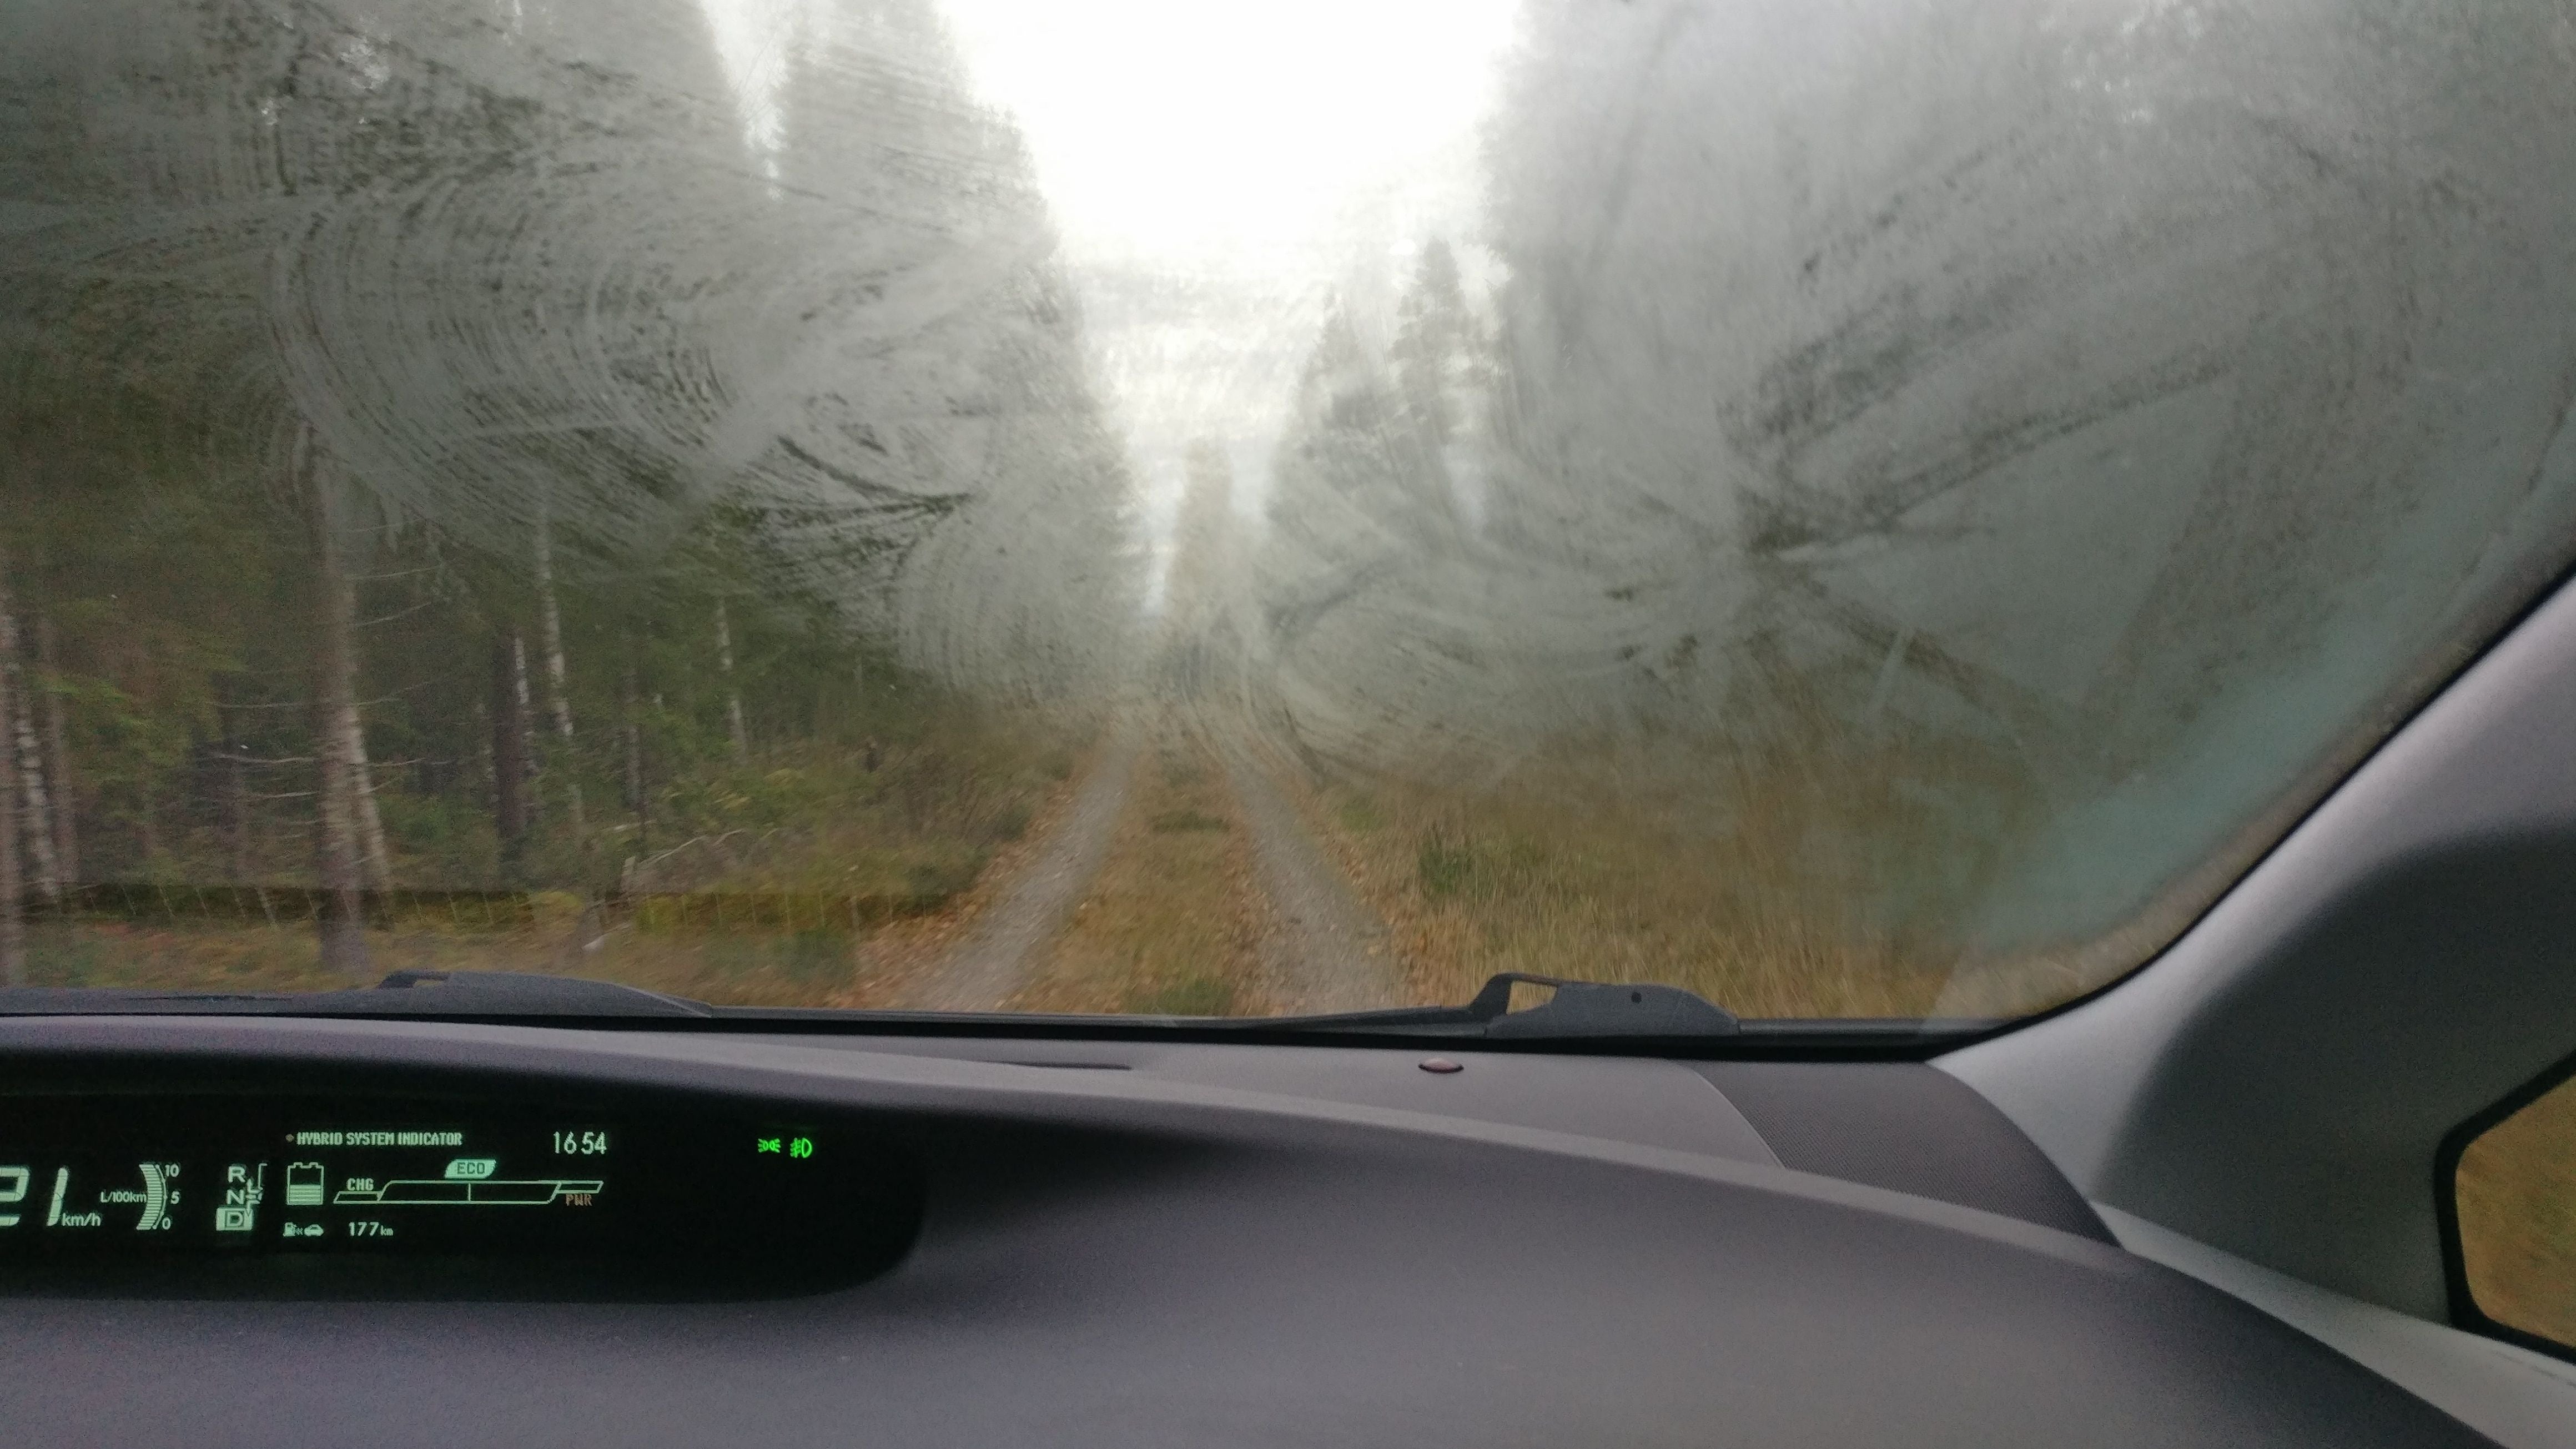 Do you really need a defogger for your car windshield?